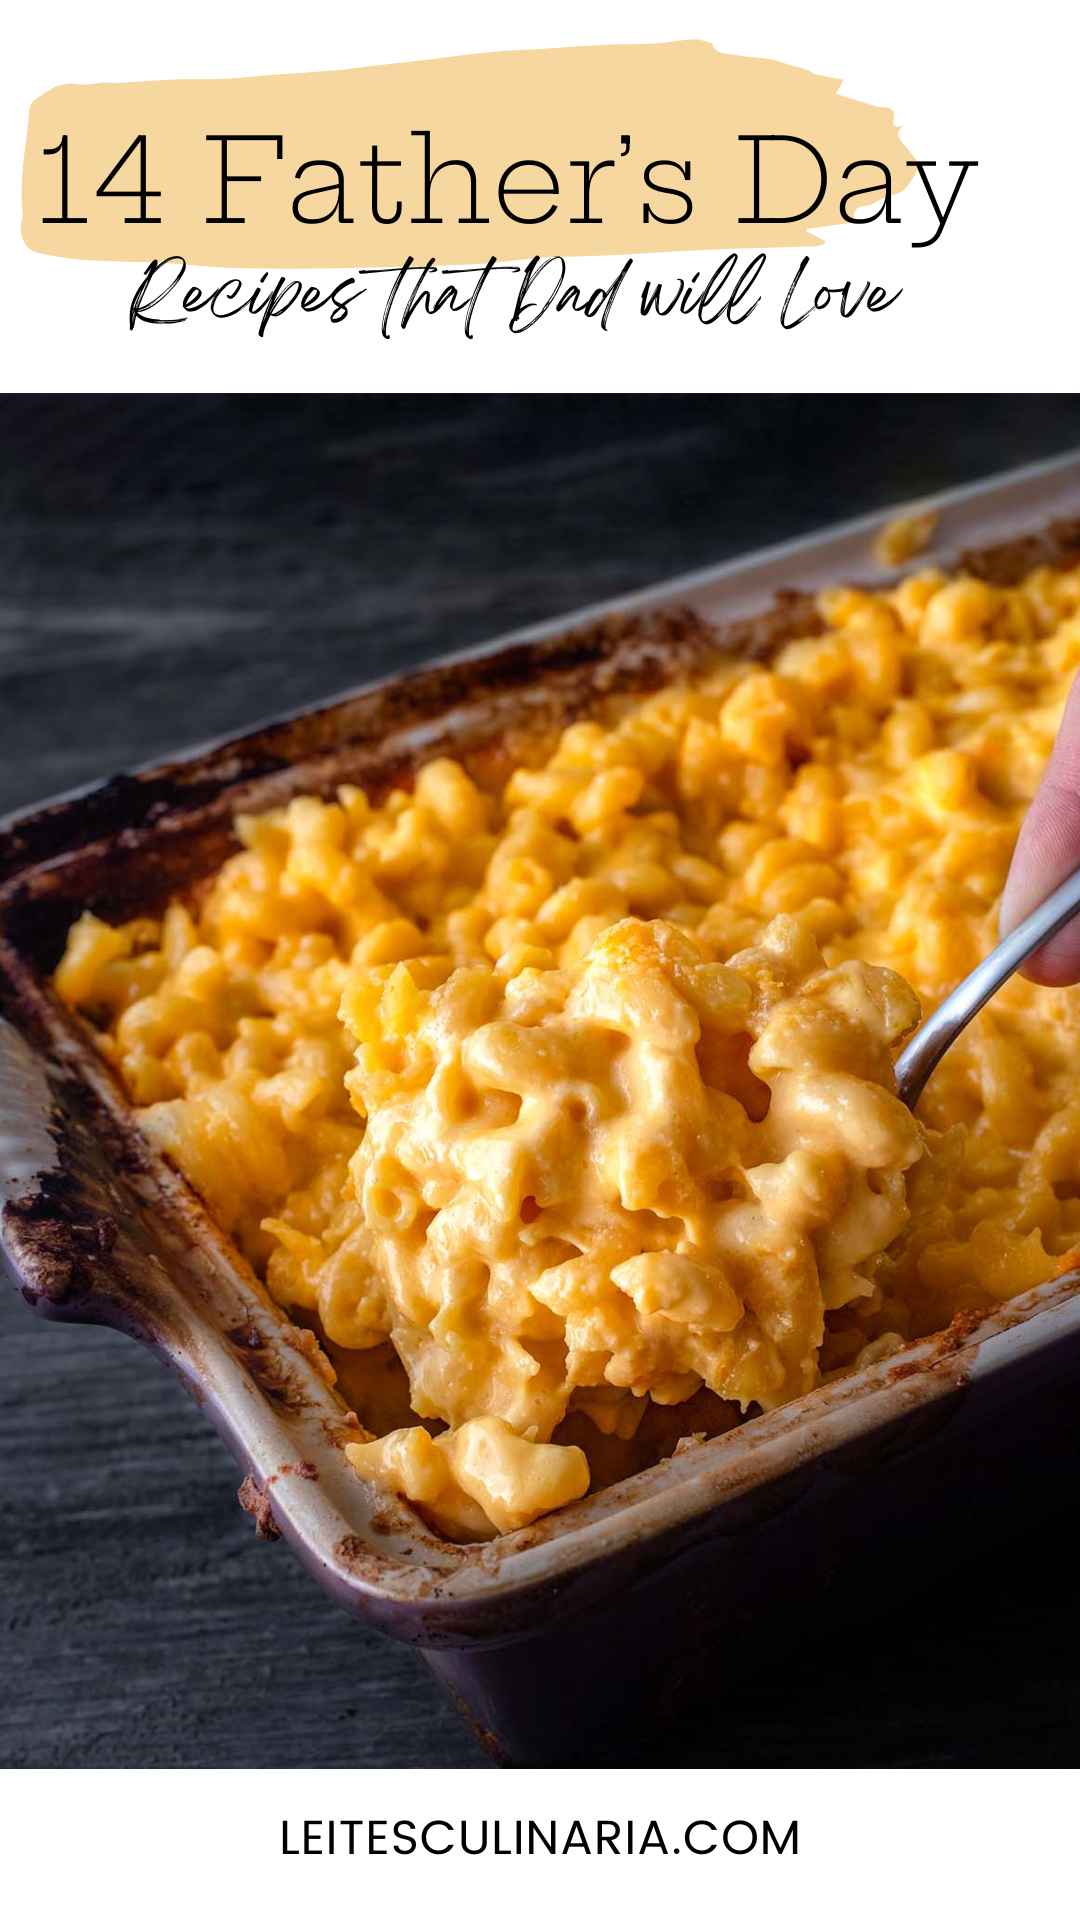 A baking dish filled with creamy macaroni and cheese.